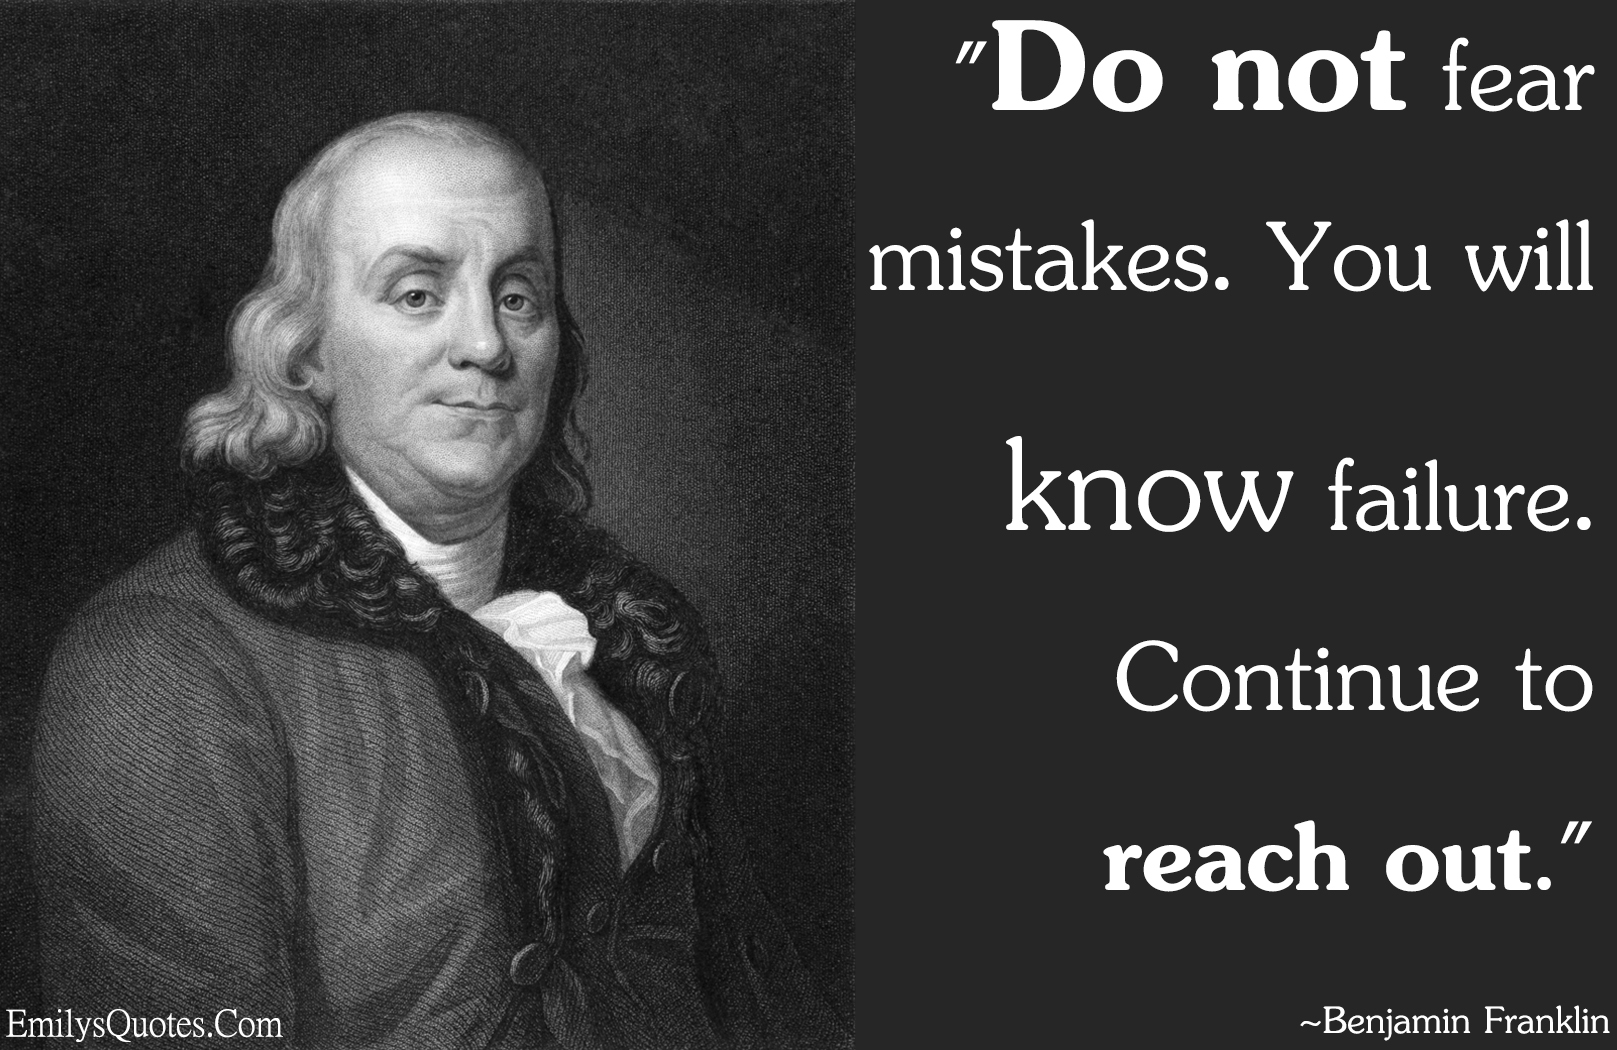 Do not fear mistakes. You will know failure. Continue to reach out